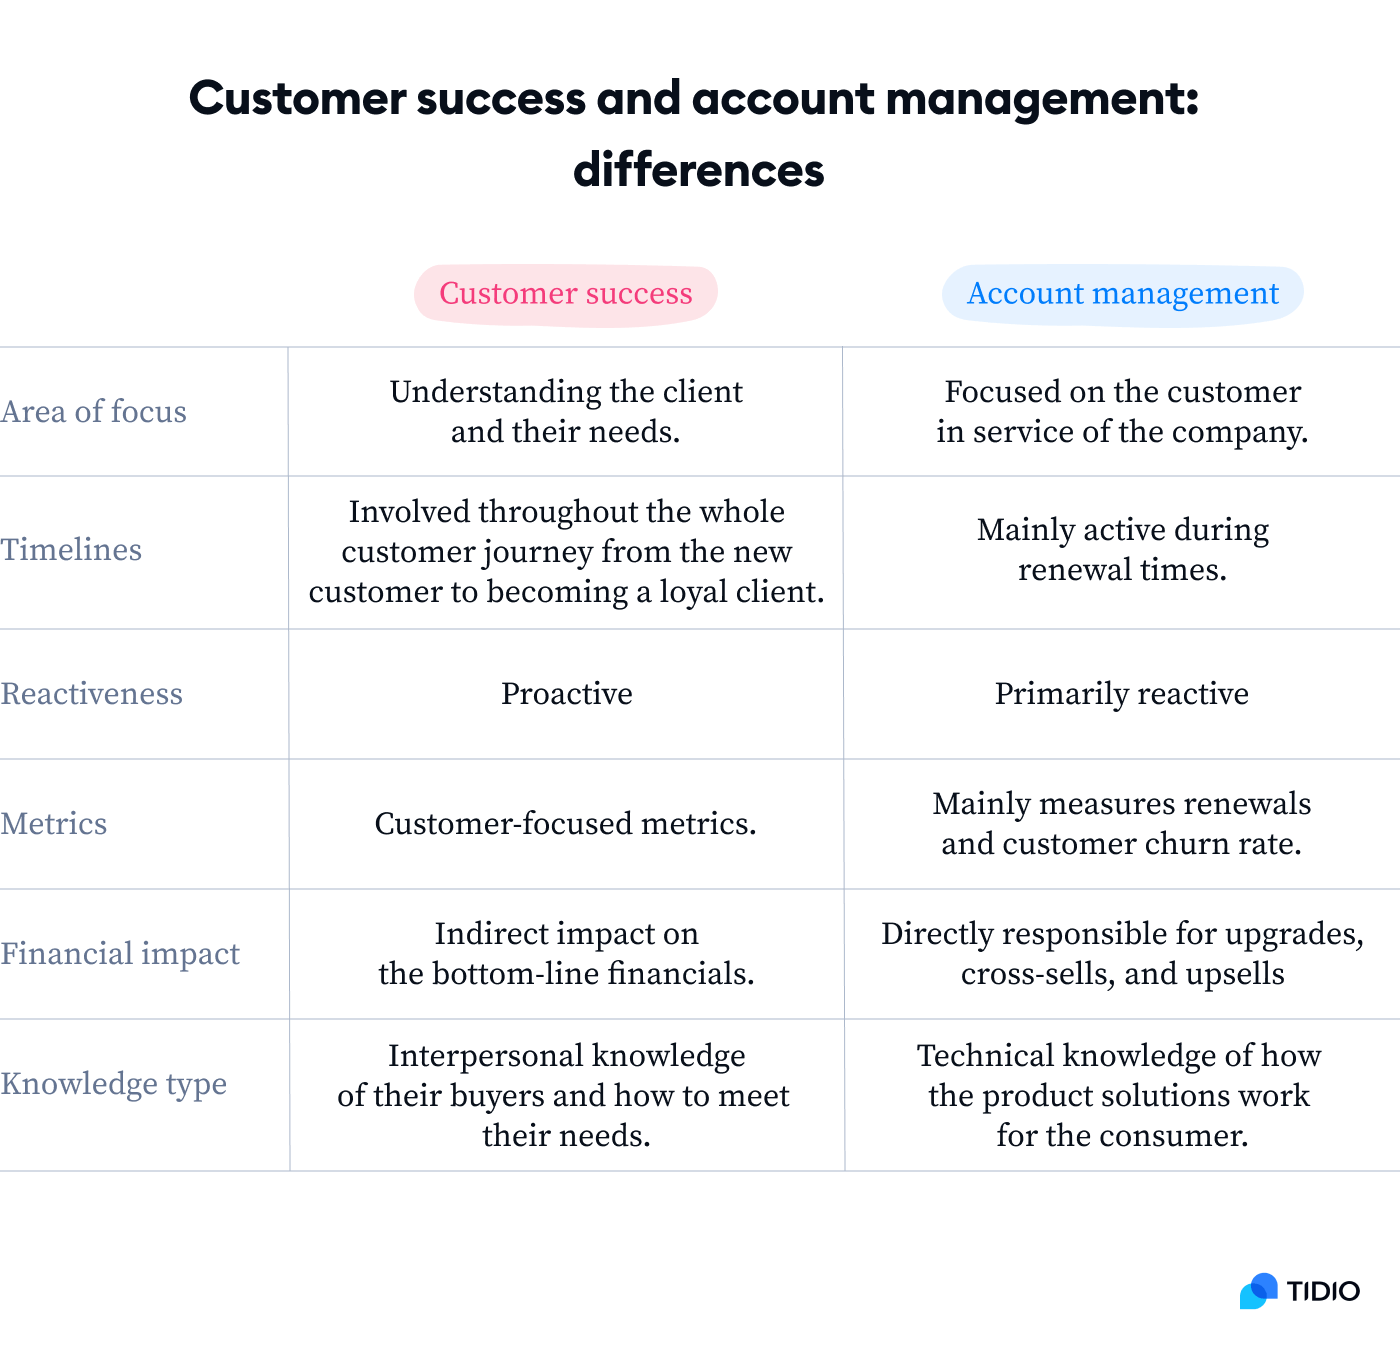 Customer Success 101 Definitions, Importance, & More